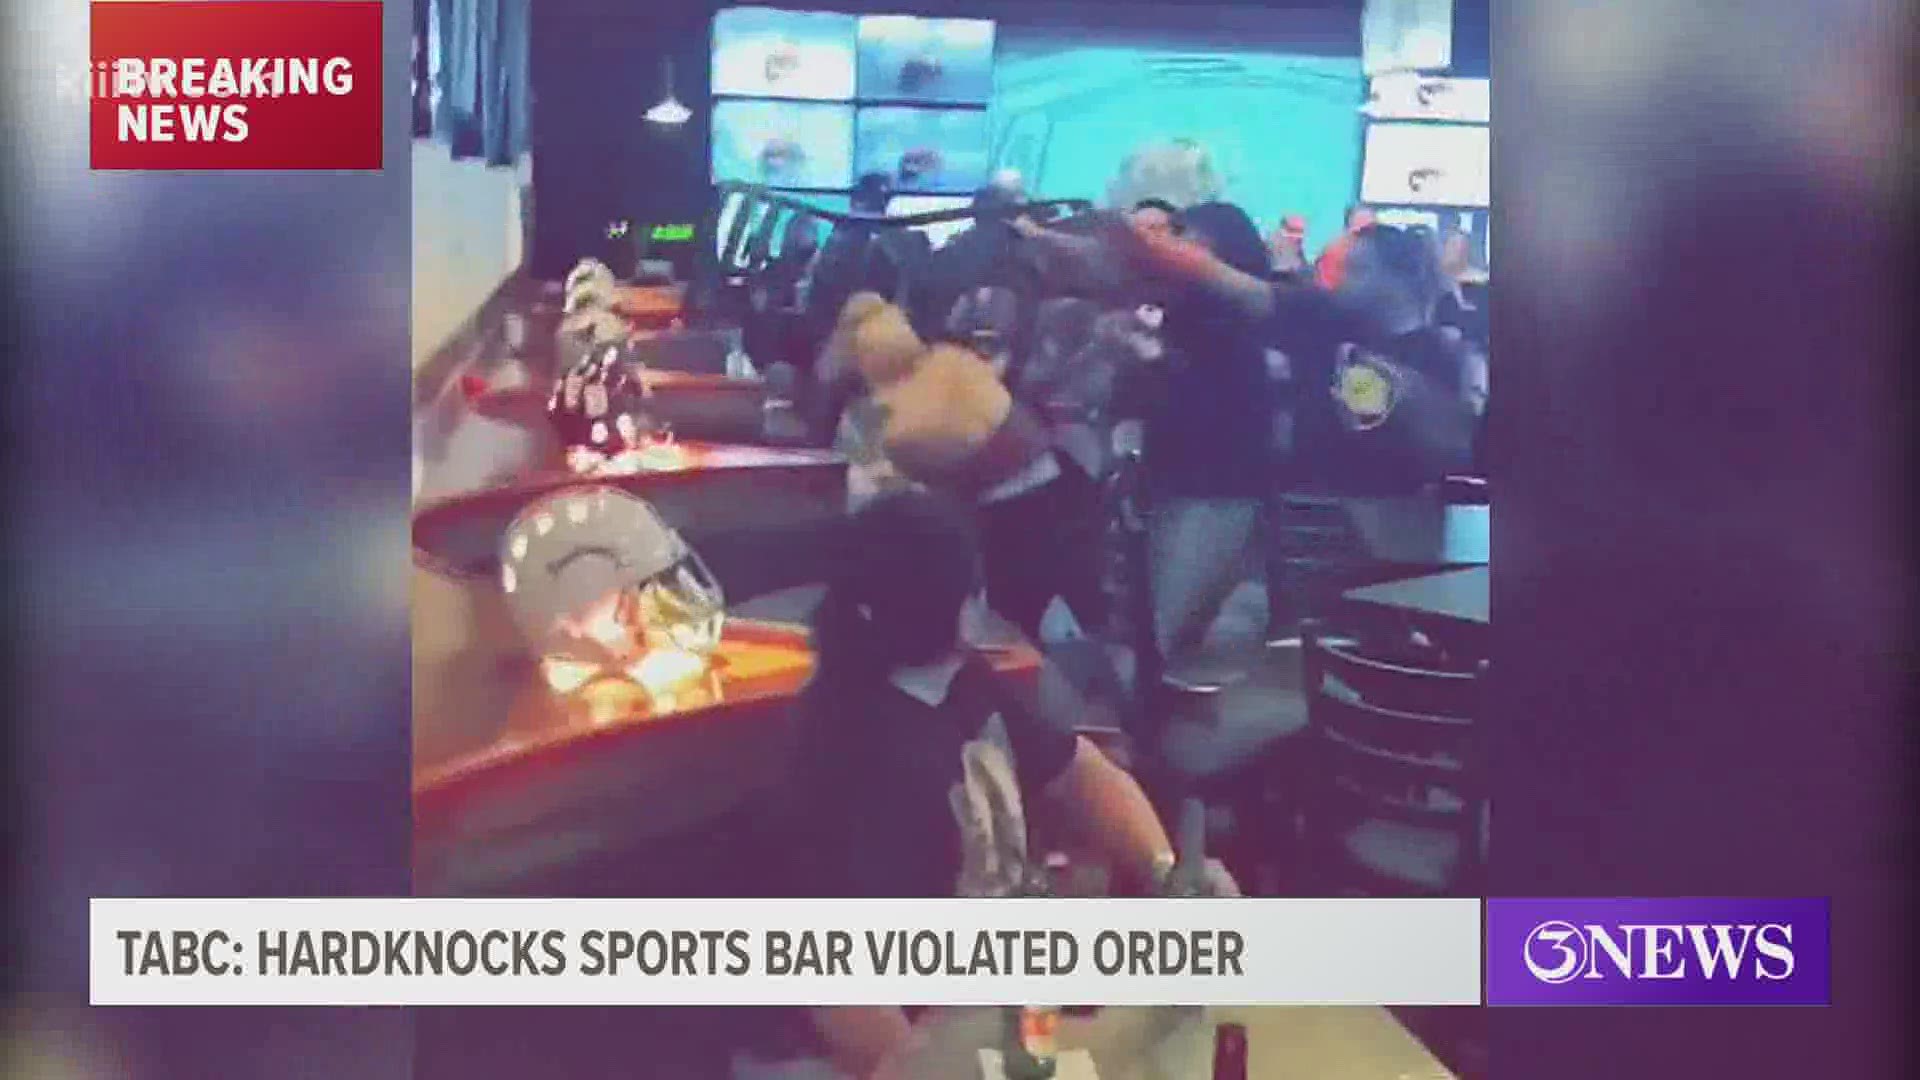 TABC has suspended alcohol sales at HardKnocks Sports Lounge & Grill for 30 days.